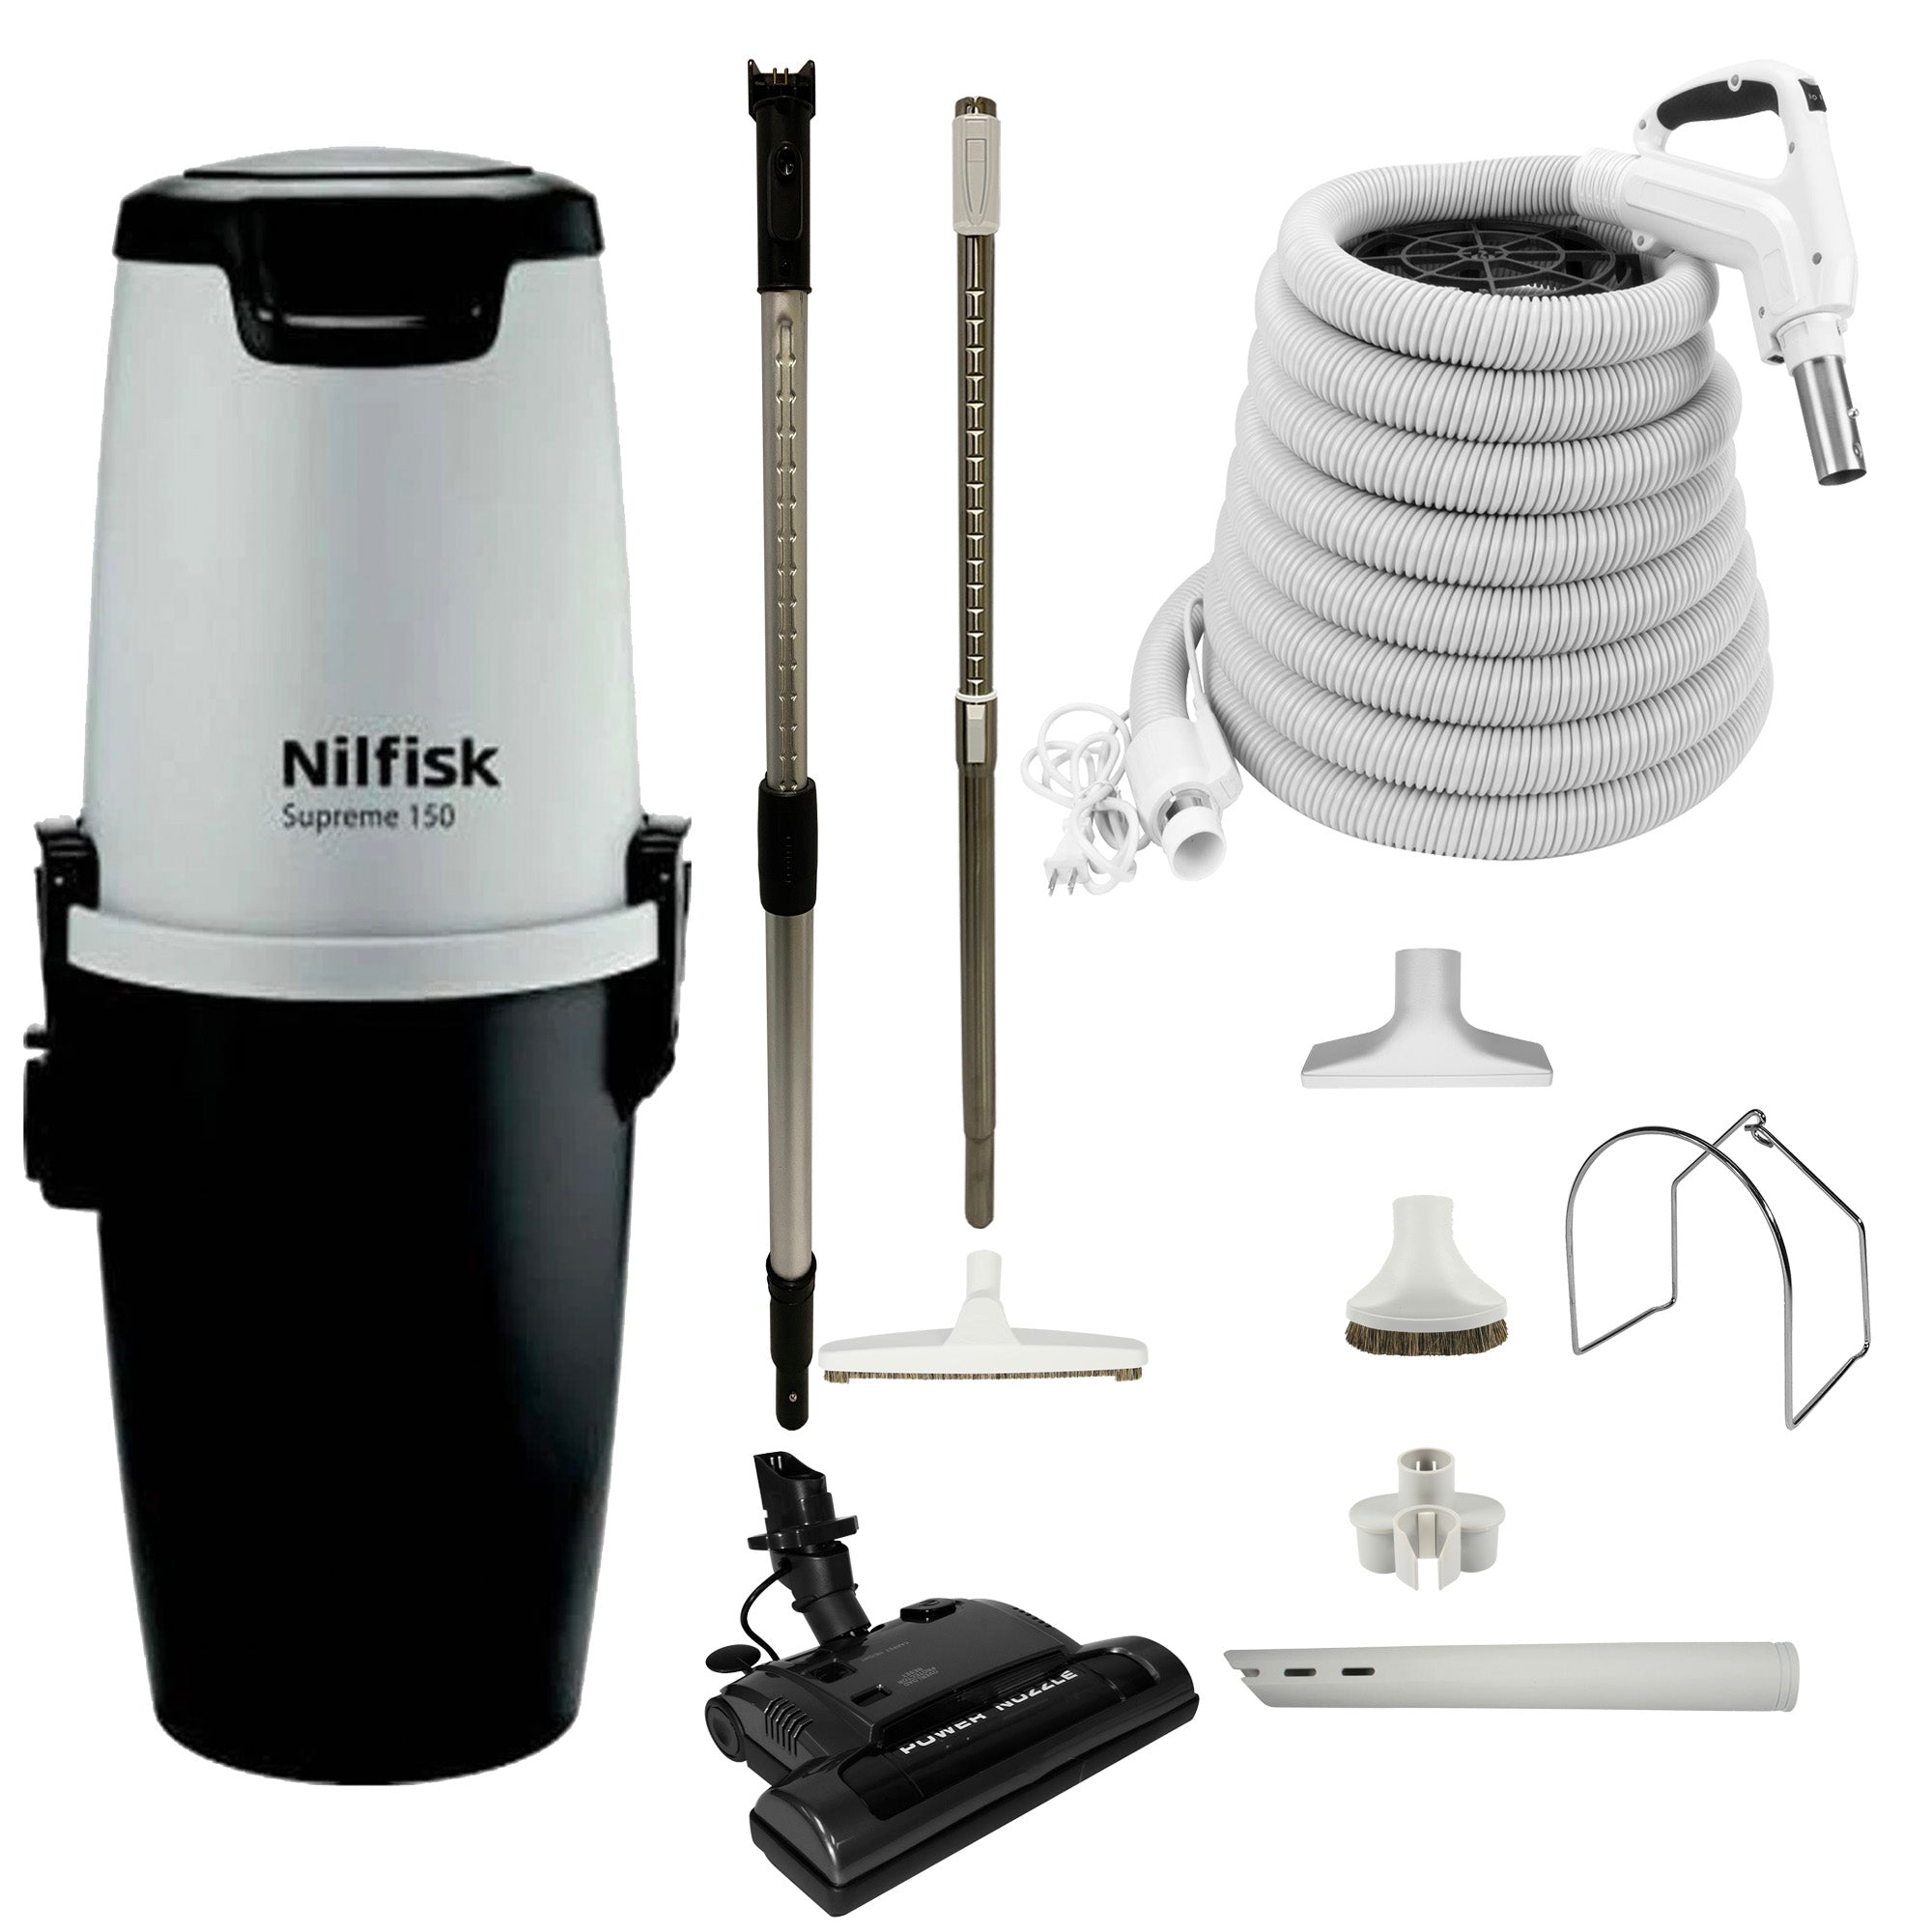 Nilfisk Supreme 150 Central Vacuum with Standard Electric Package